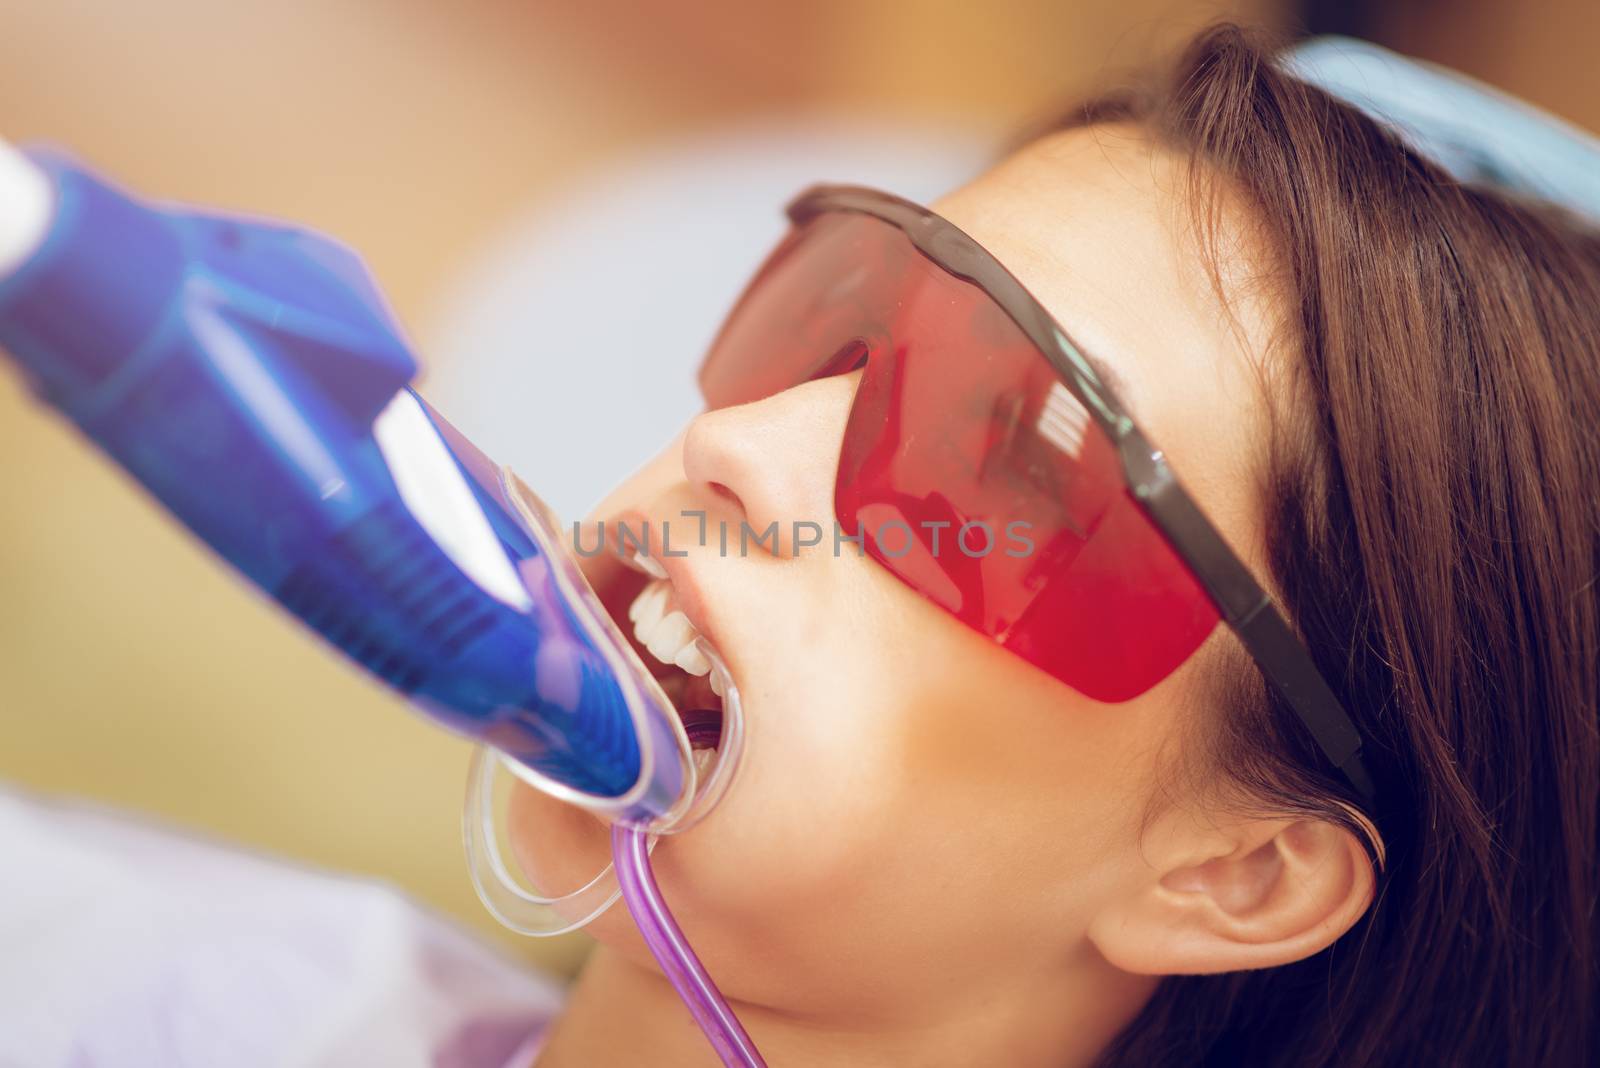 Beautiful young woman in visit at the dentist office. She is whitening teeth with ultraviolet light. Close-up.